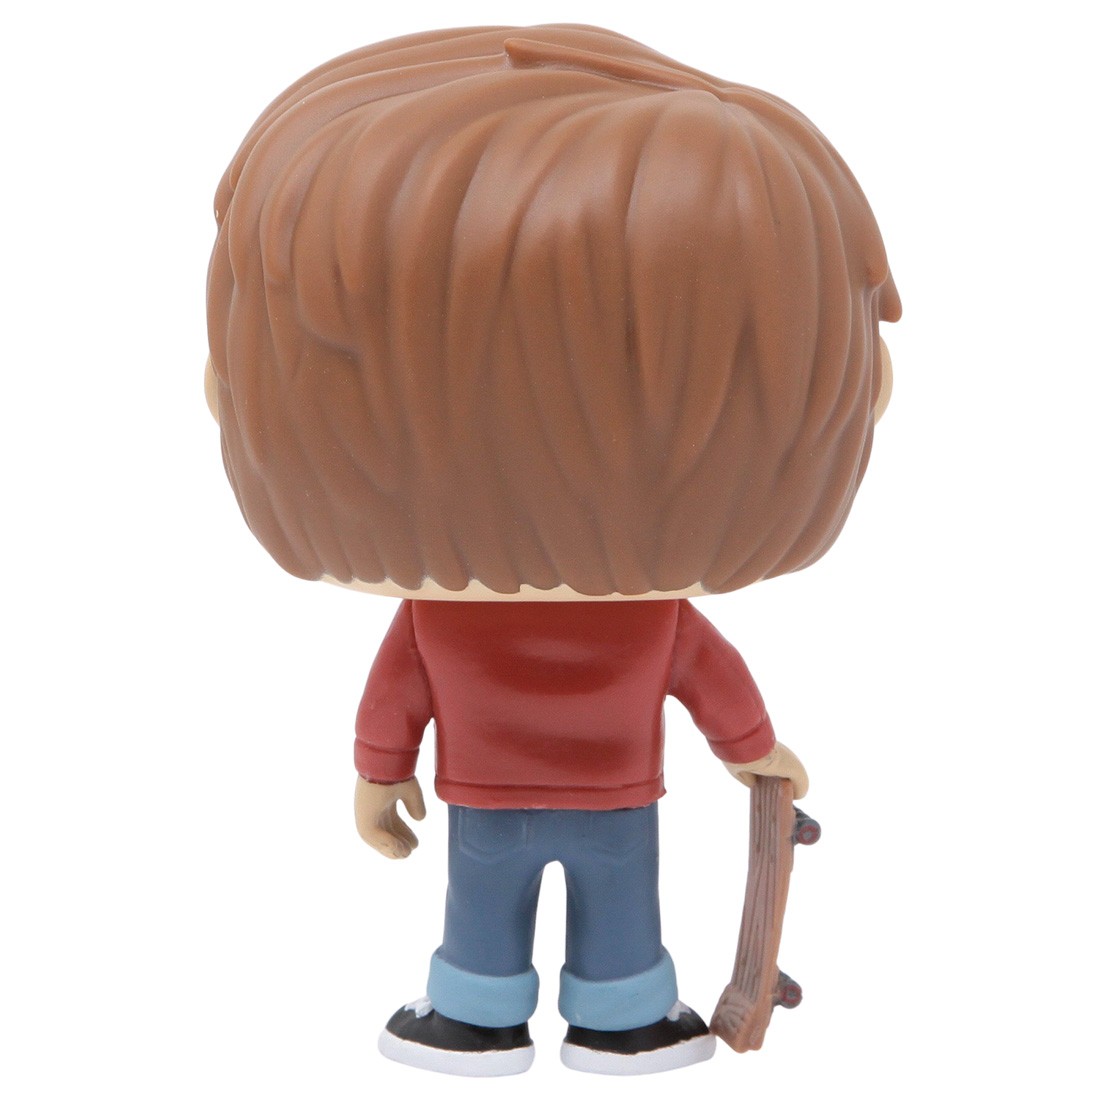 1955 Vinyl Figure for sale online Funko Pop Movies: Back to the Future Marty McFly